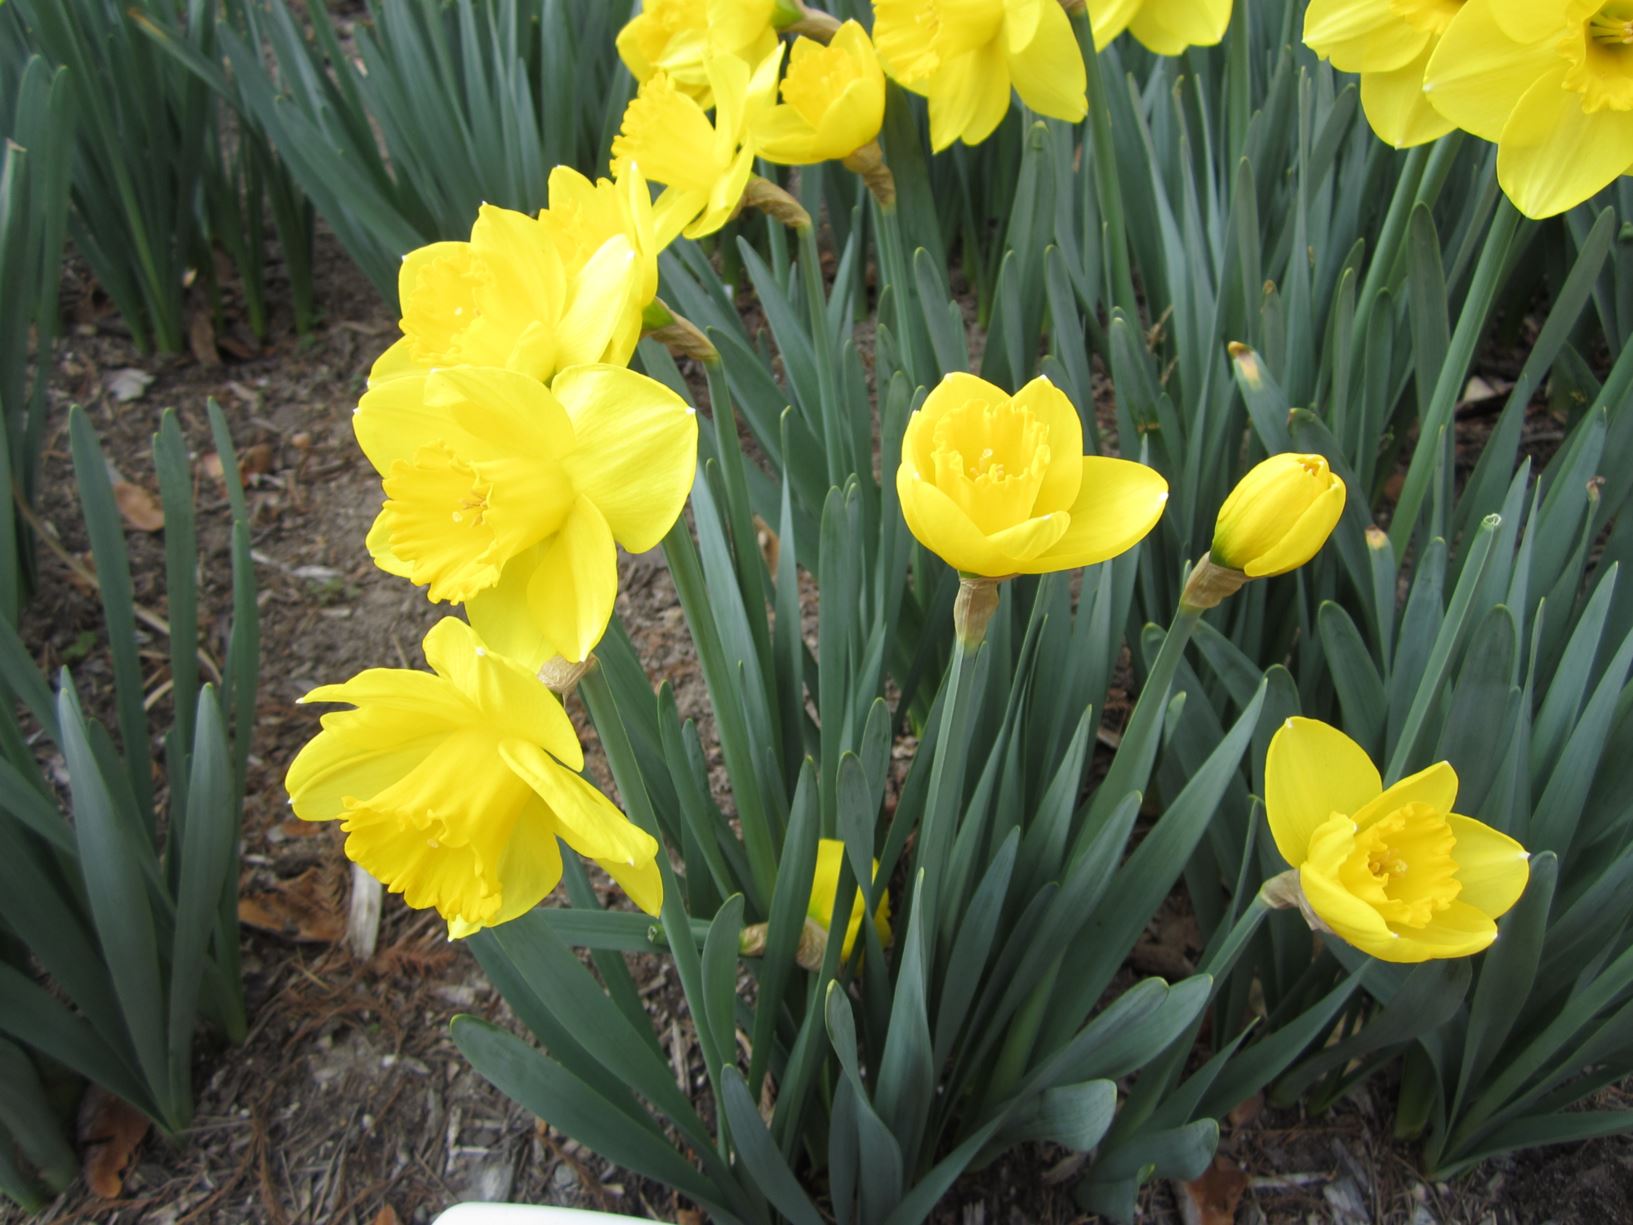 Narcissus 'Camelot' - large-cup daffodil